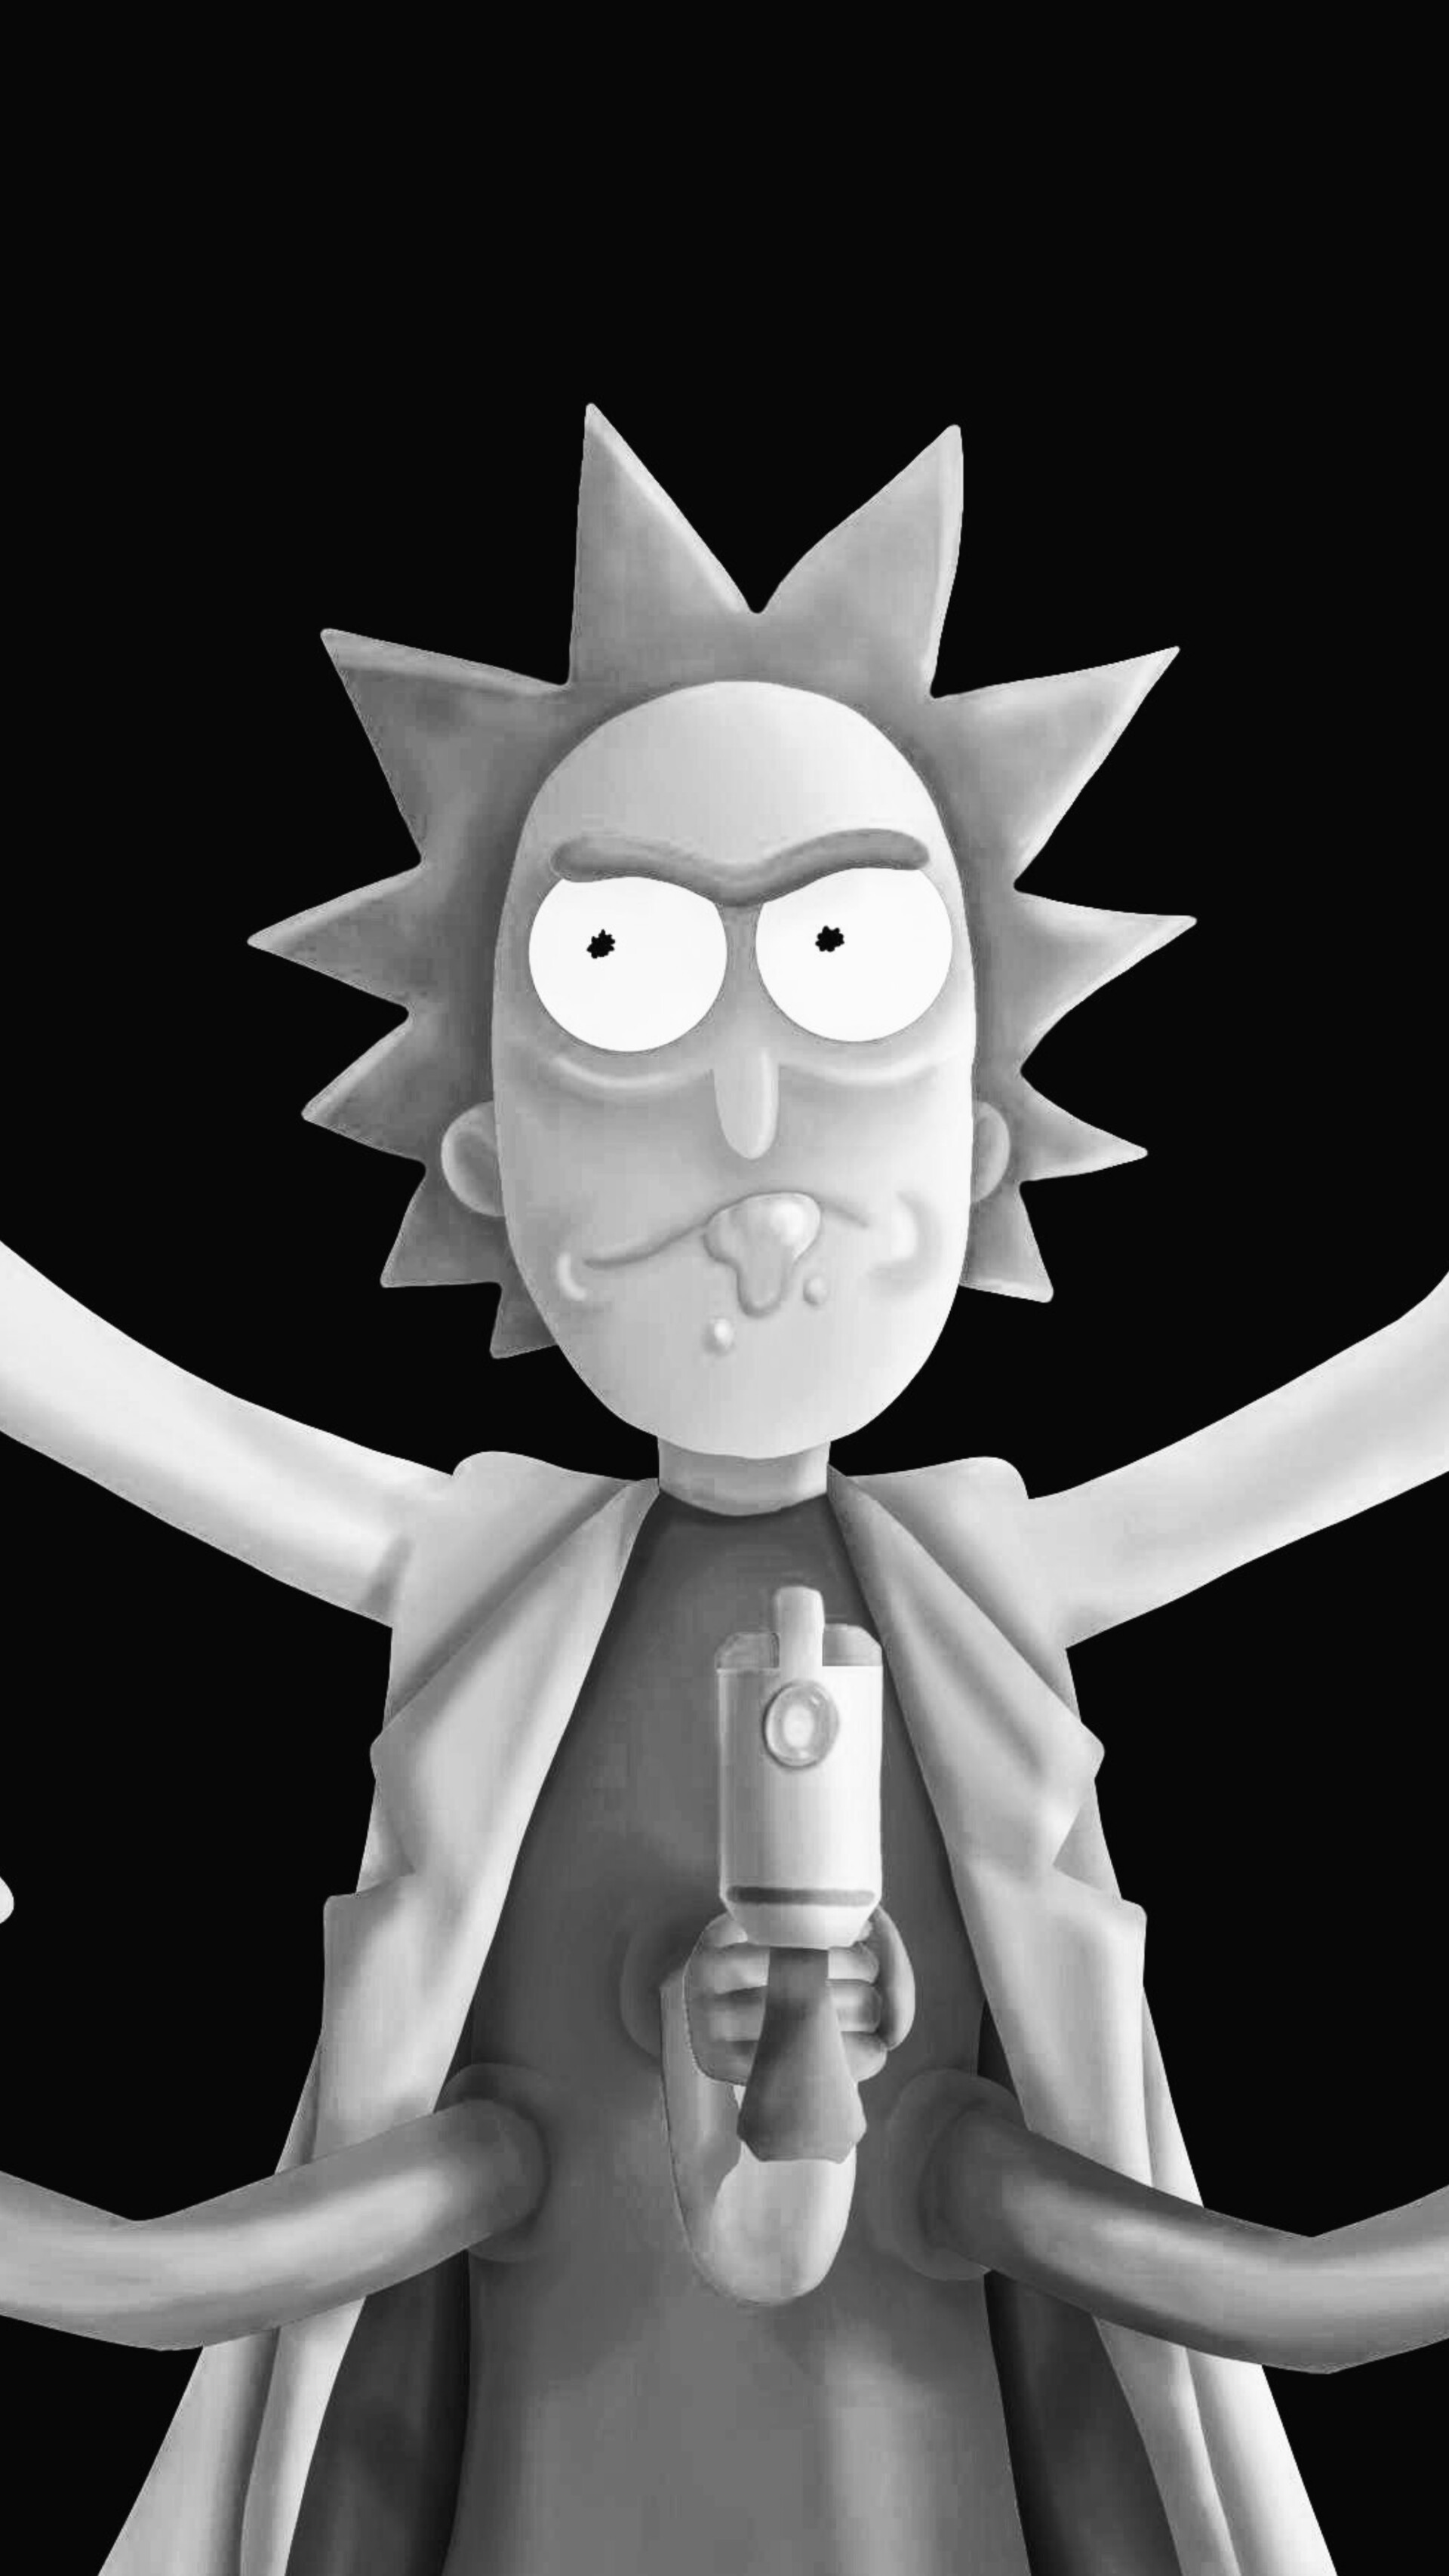 Morty 1920x1080 Resolution Wallpapers Laptop Full HD 1080P